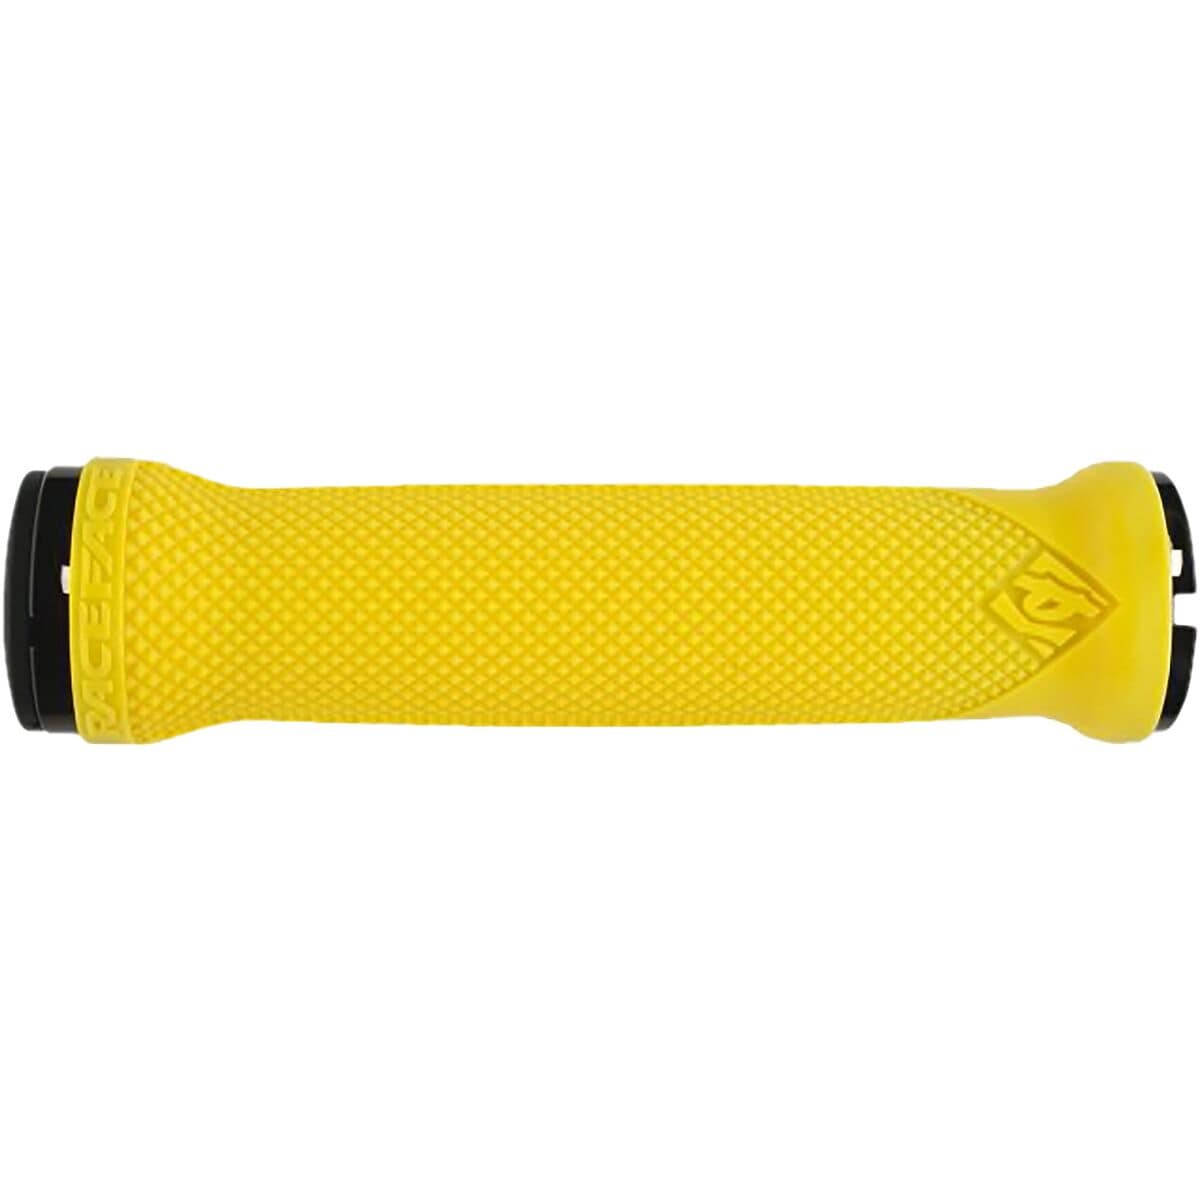 Race Face Love Handle Grip Yellow, One Size